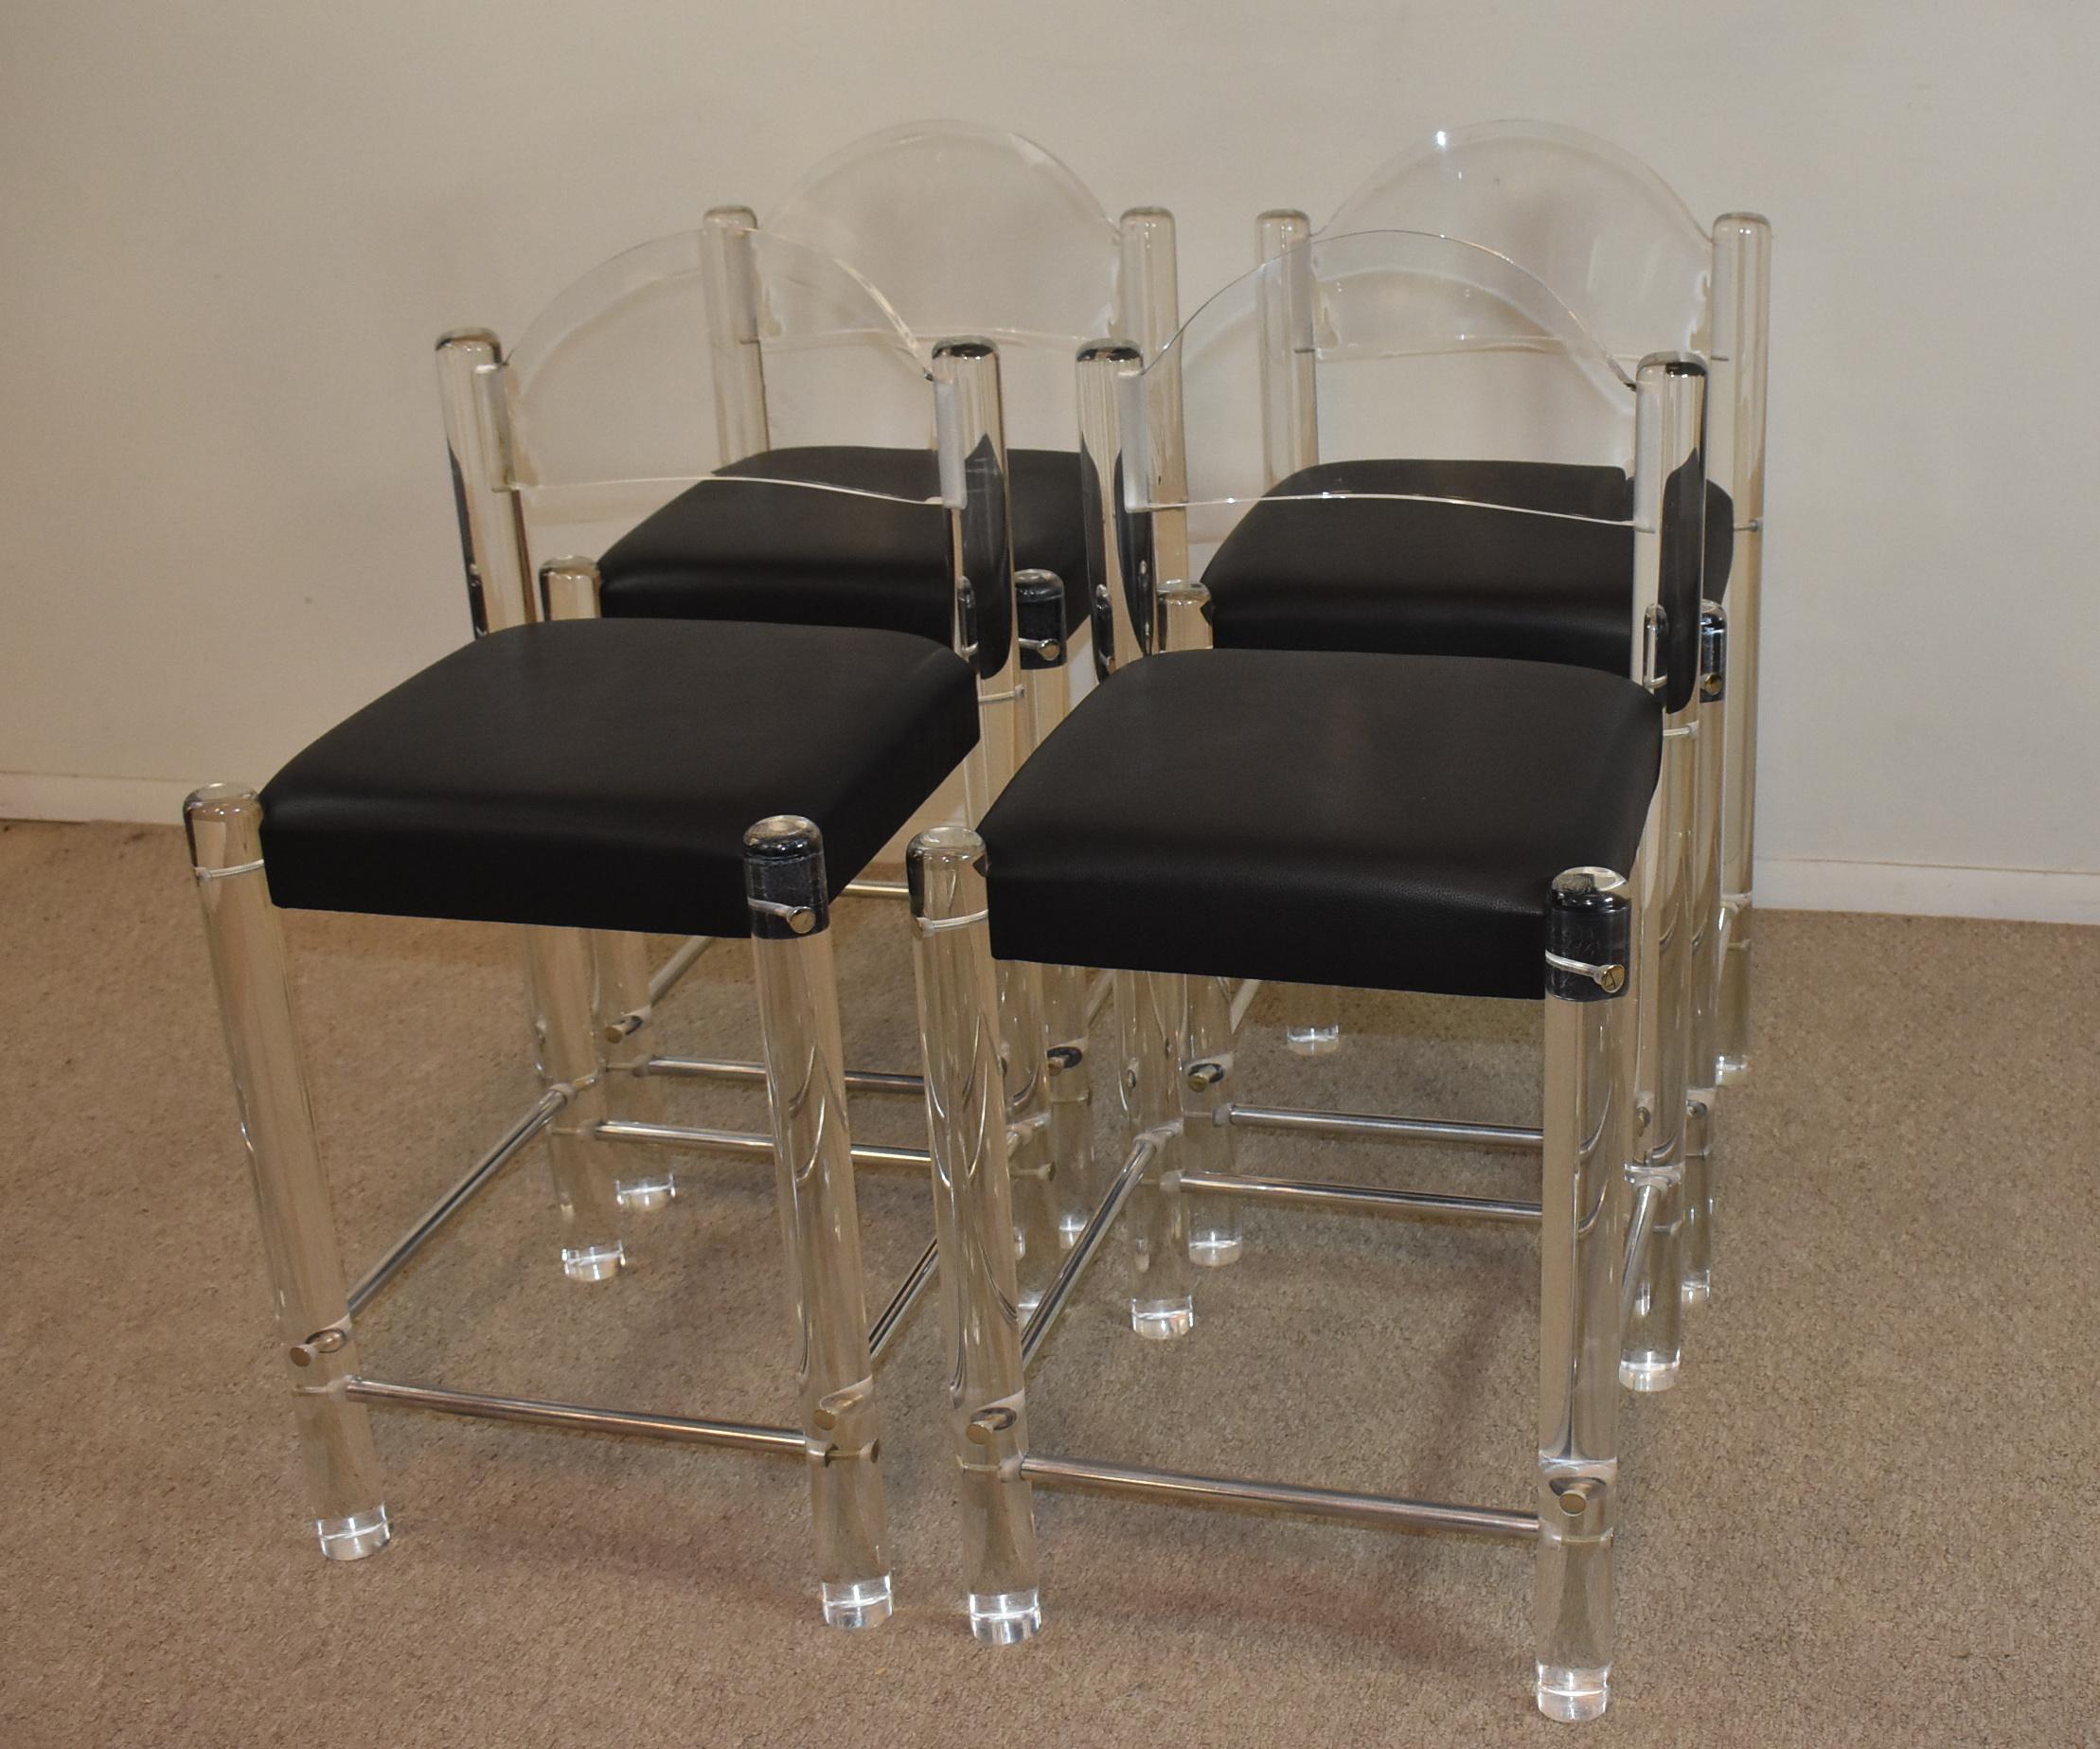 Set of 4 unique counter height bar stools with tubular acrylic legs, chrome stretchers and black leather seats. The acrylic backs are curved, legs are 2